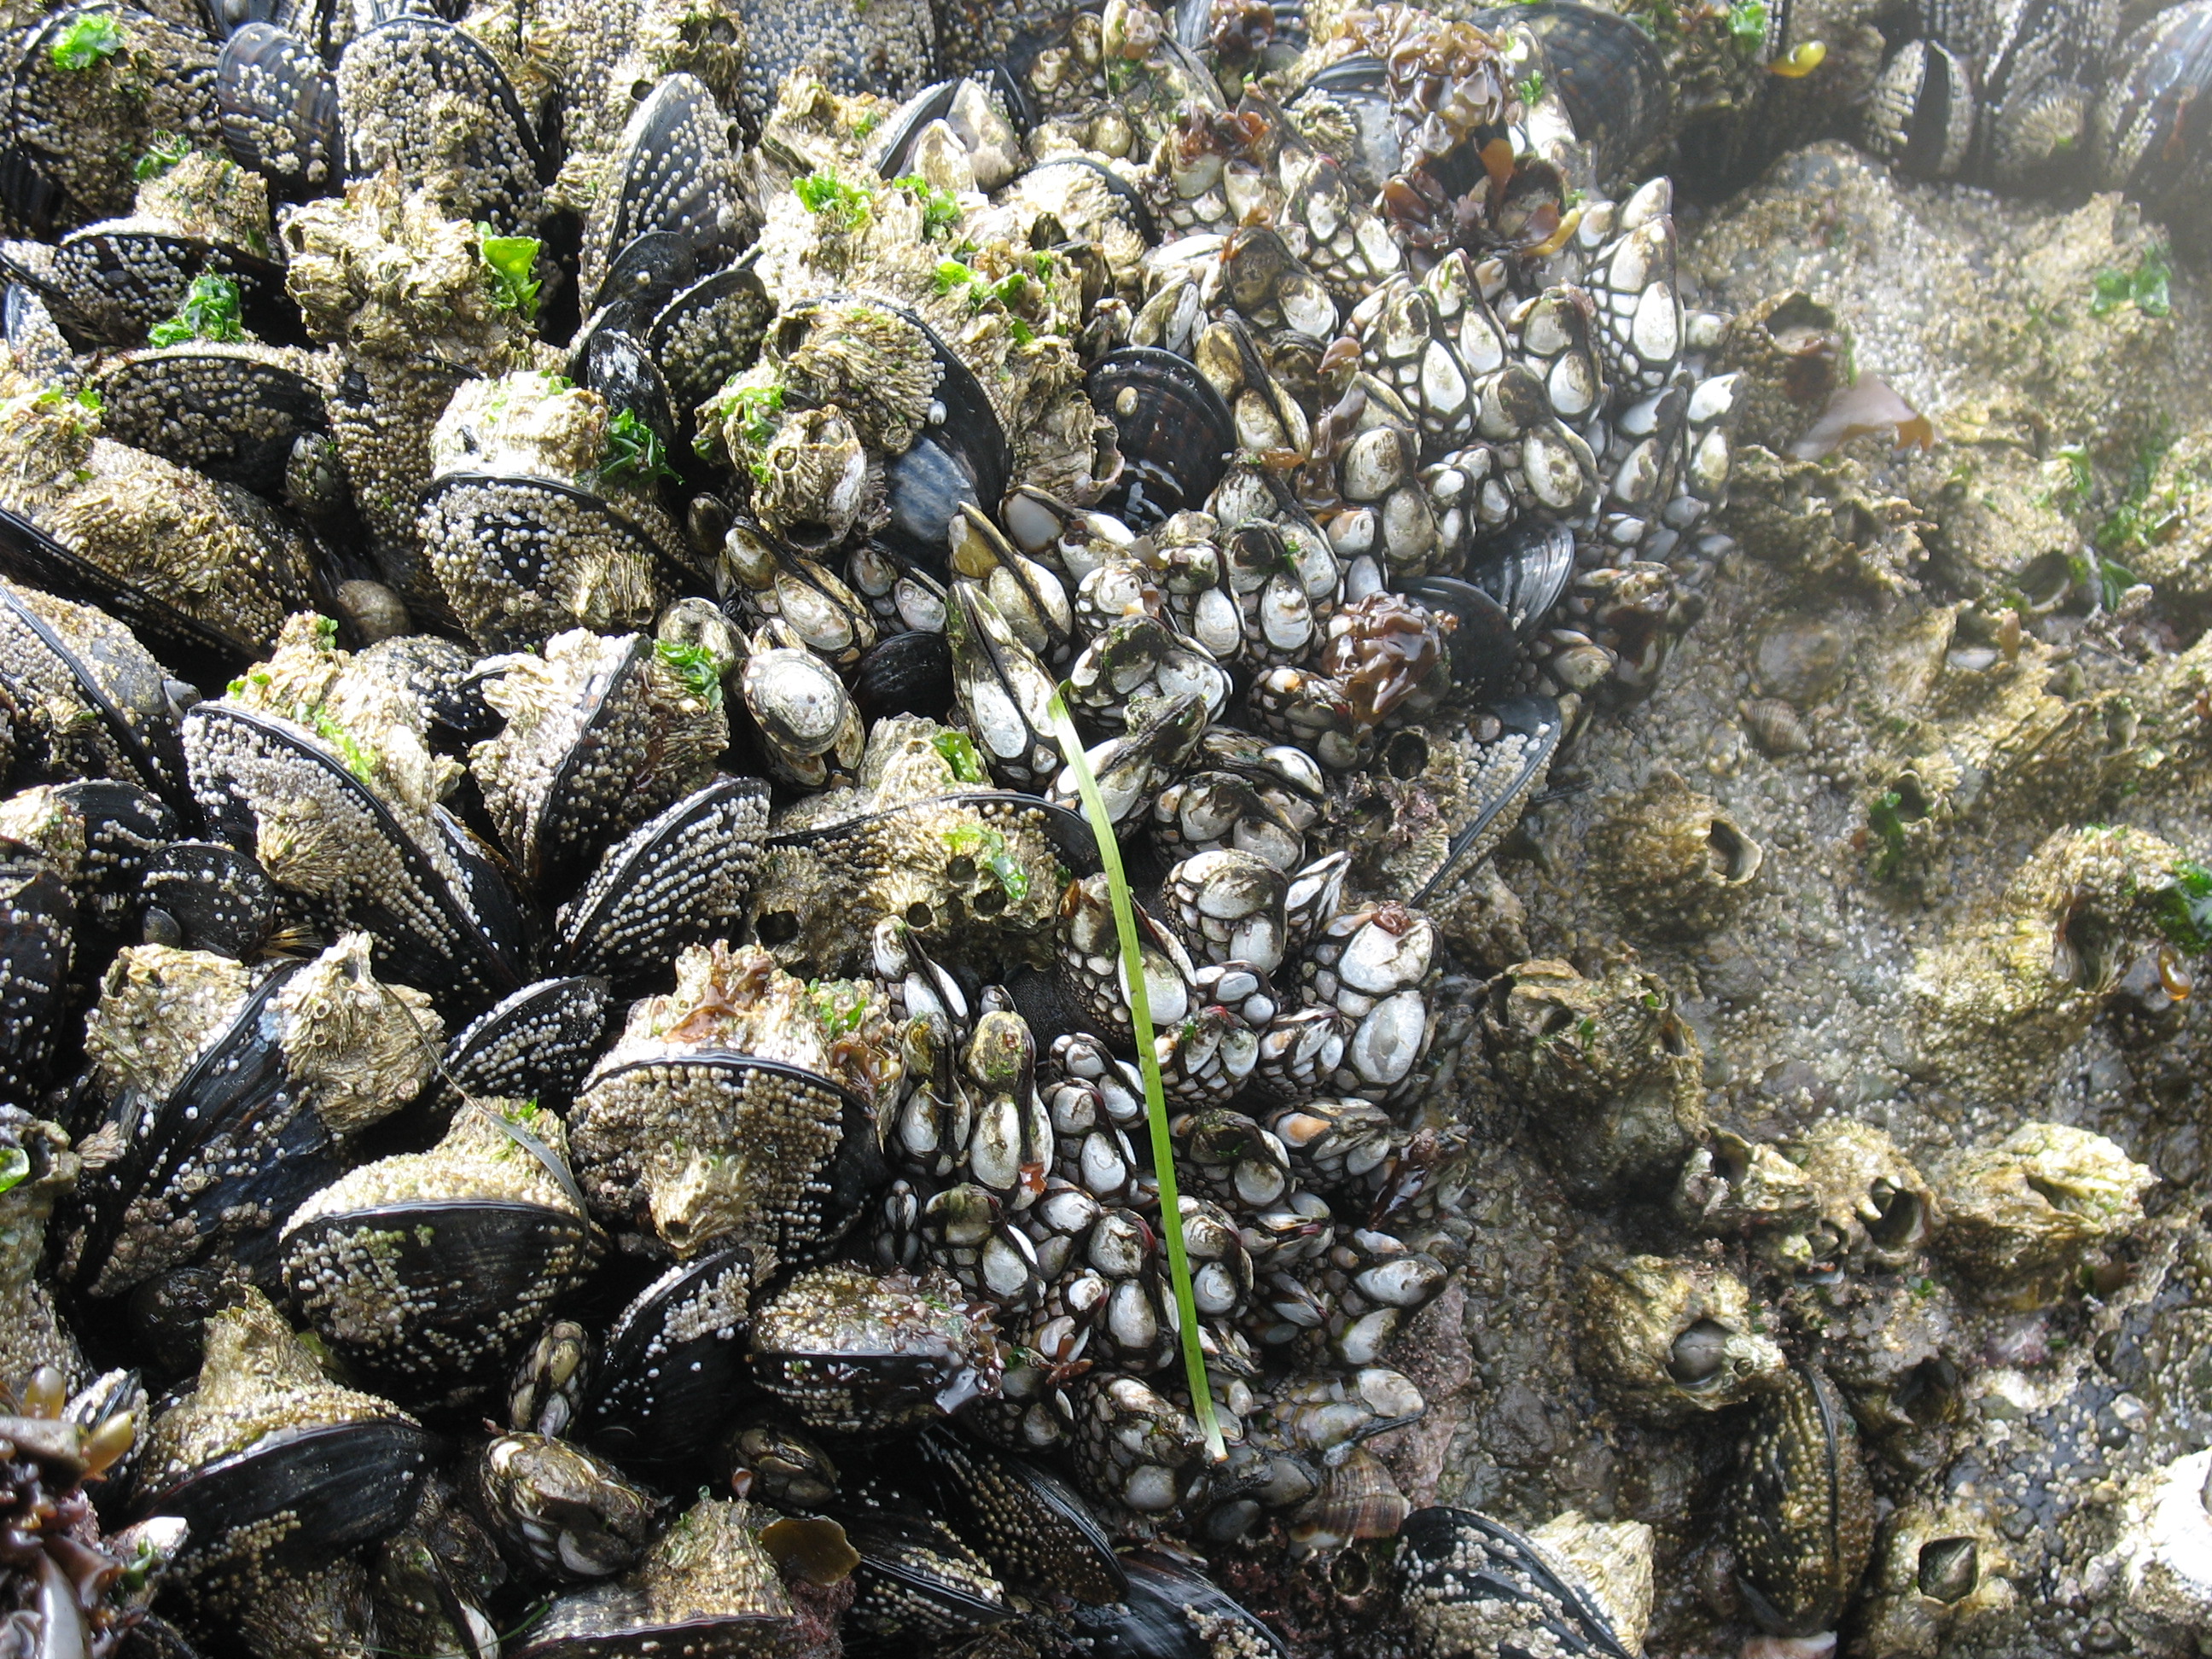 Gooseneck Barnacles and California Mussels